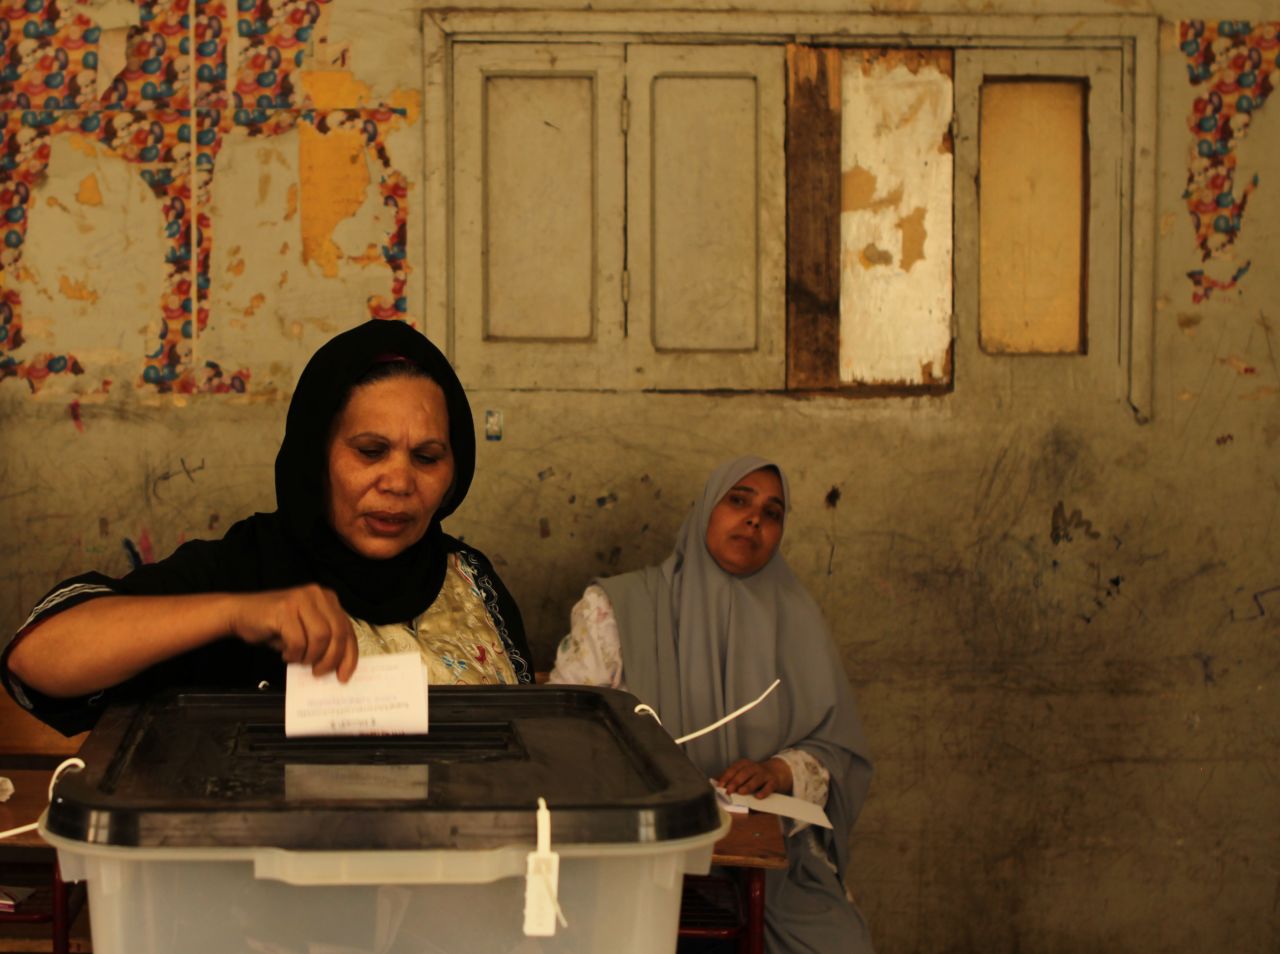 An Egyptian Coptic Christian woman casts her vote in the Cairo Coptic neighborhood of Shubra.